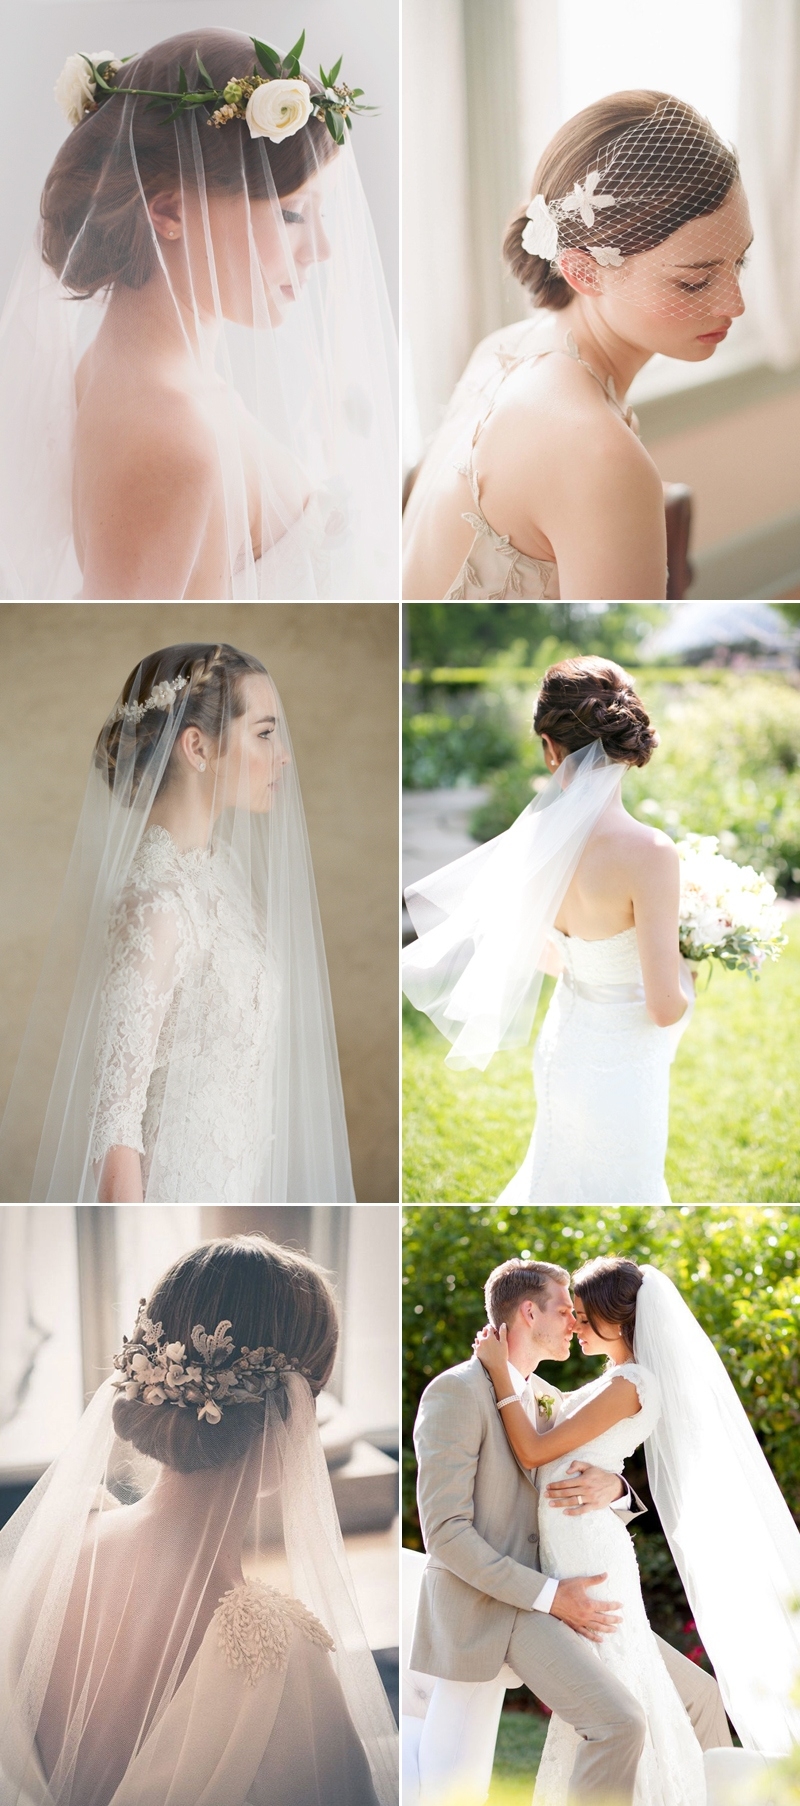 5 Chic Bridal Hairstyles That Look Good With Veils! - Praise within Hair Styles With Cathedral Veils